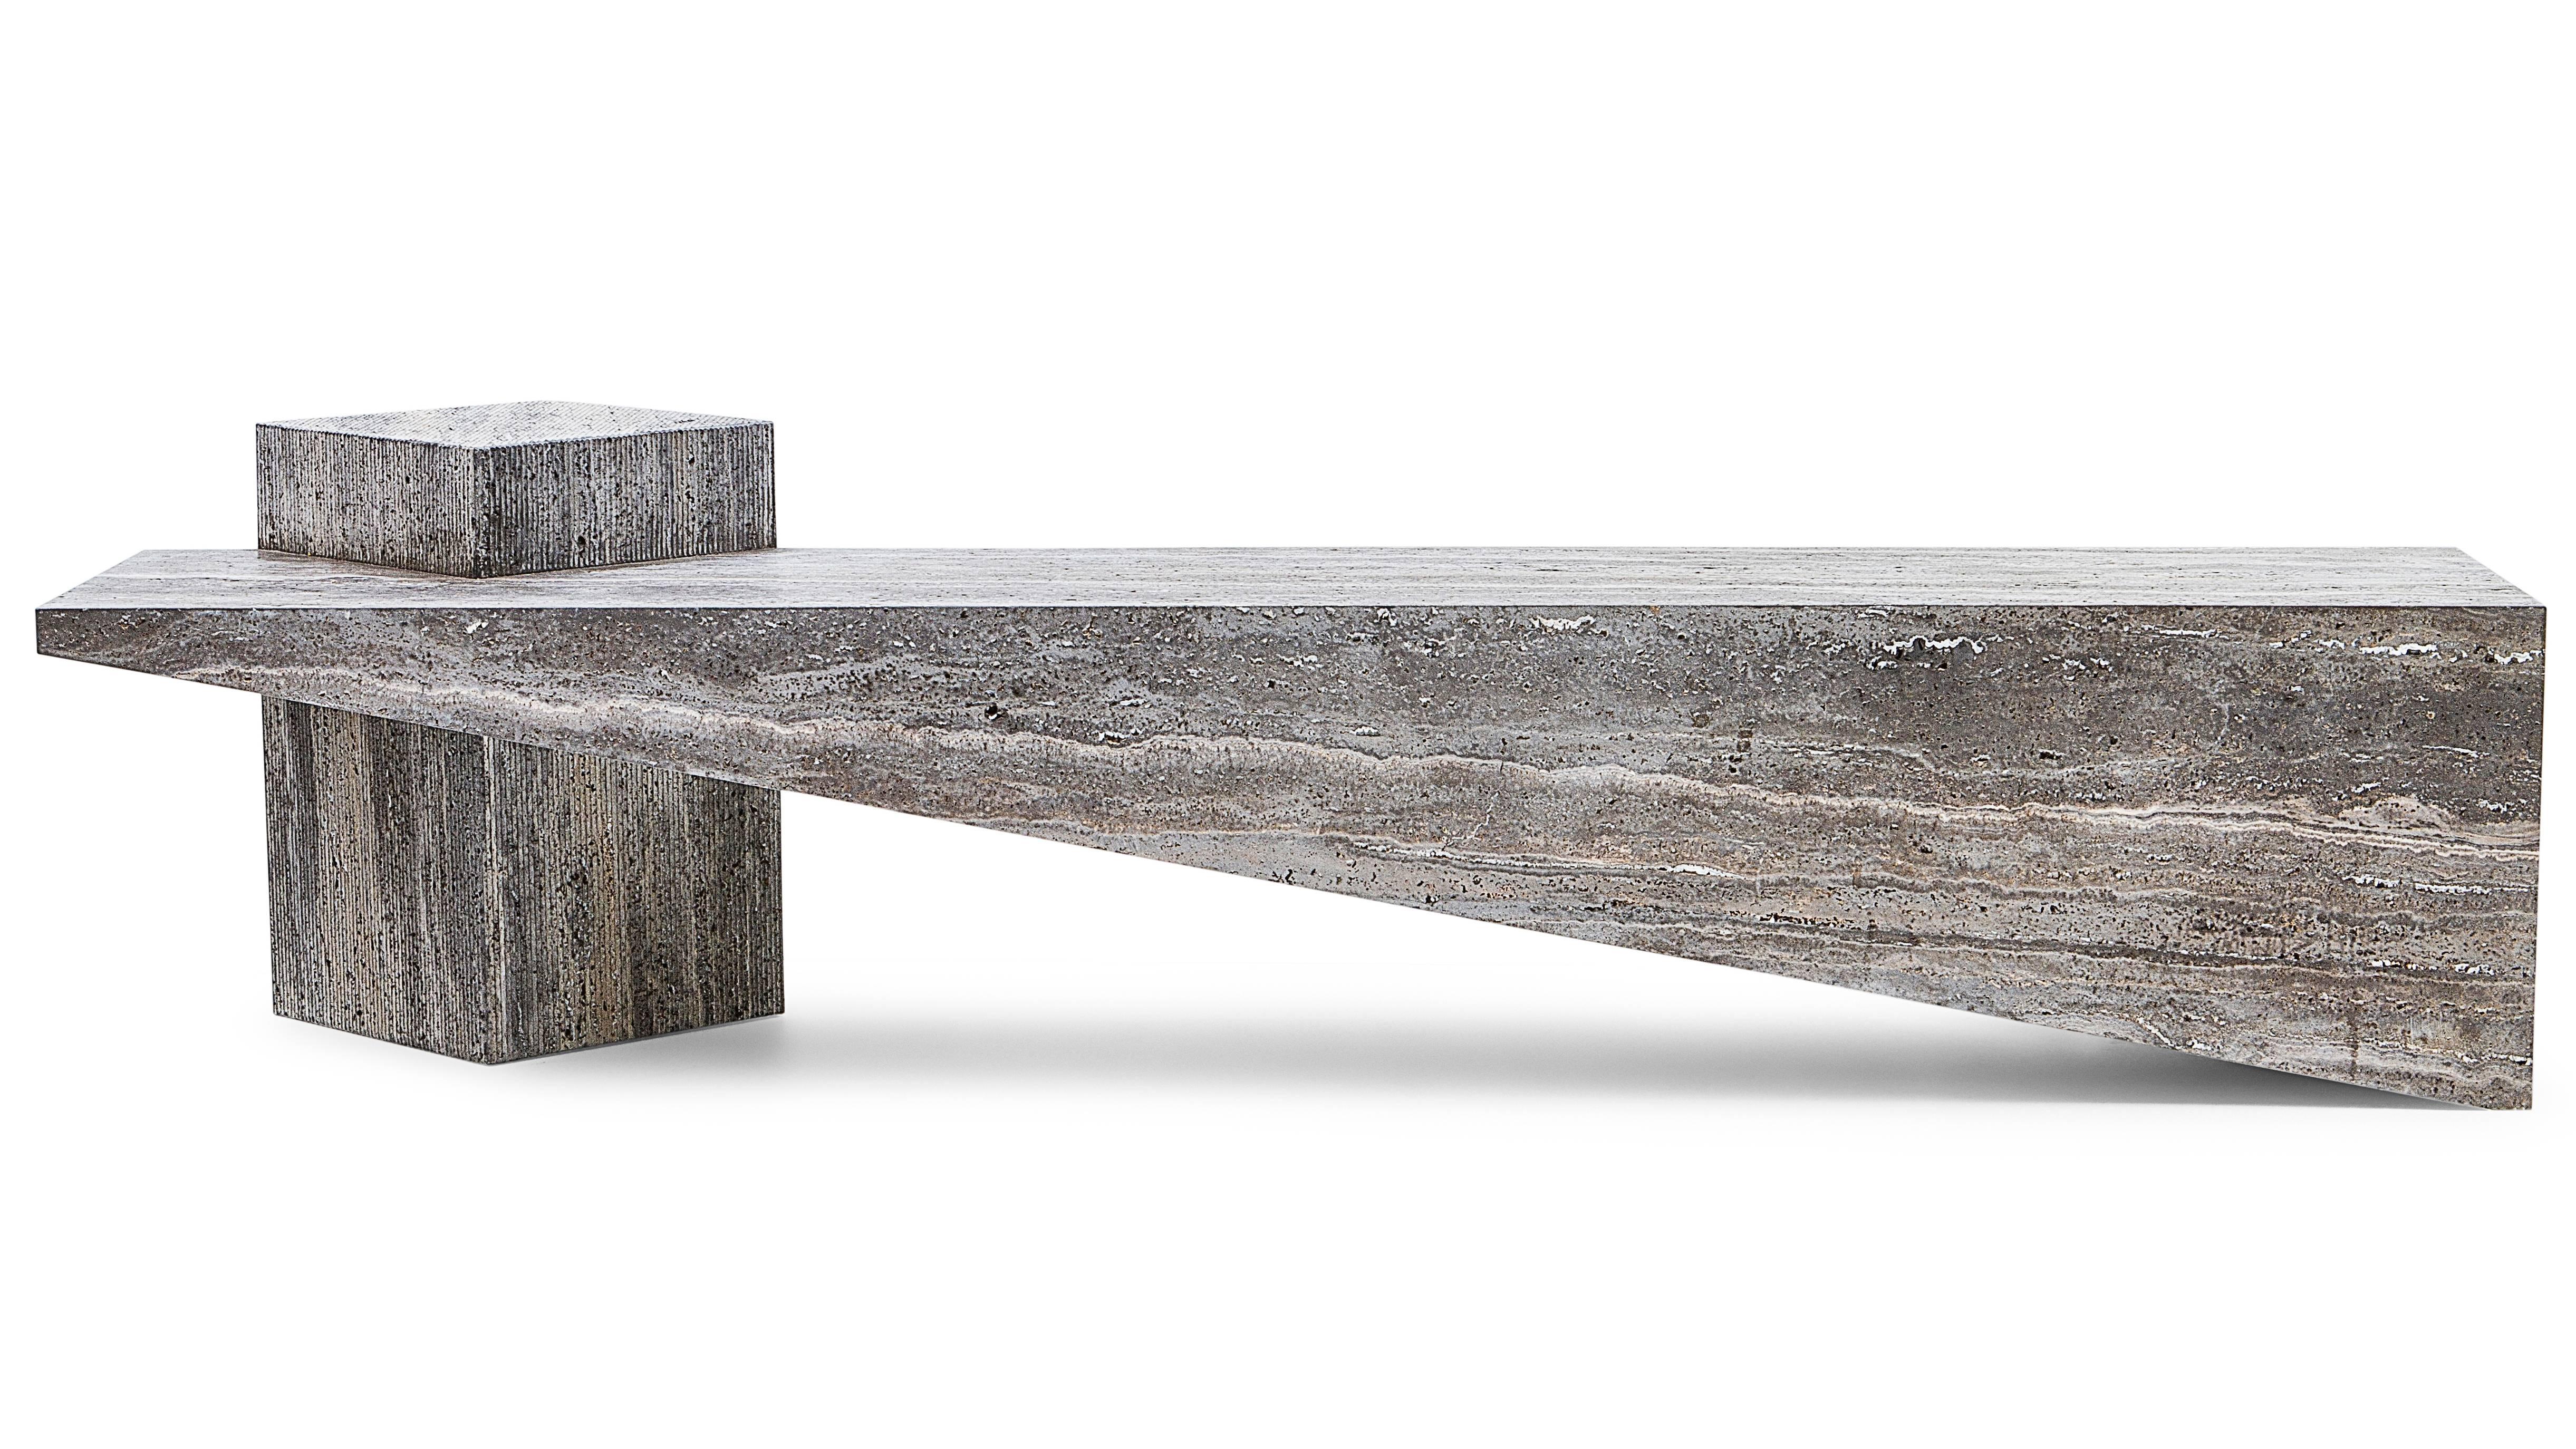 The p.dr bench is made in marble with a small integrated table, which can be used in internal or external areas. This integration is very useful, especially in external areas. It was made of Slimstone, an extra light material, which makes it three